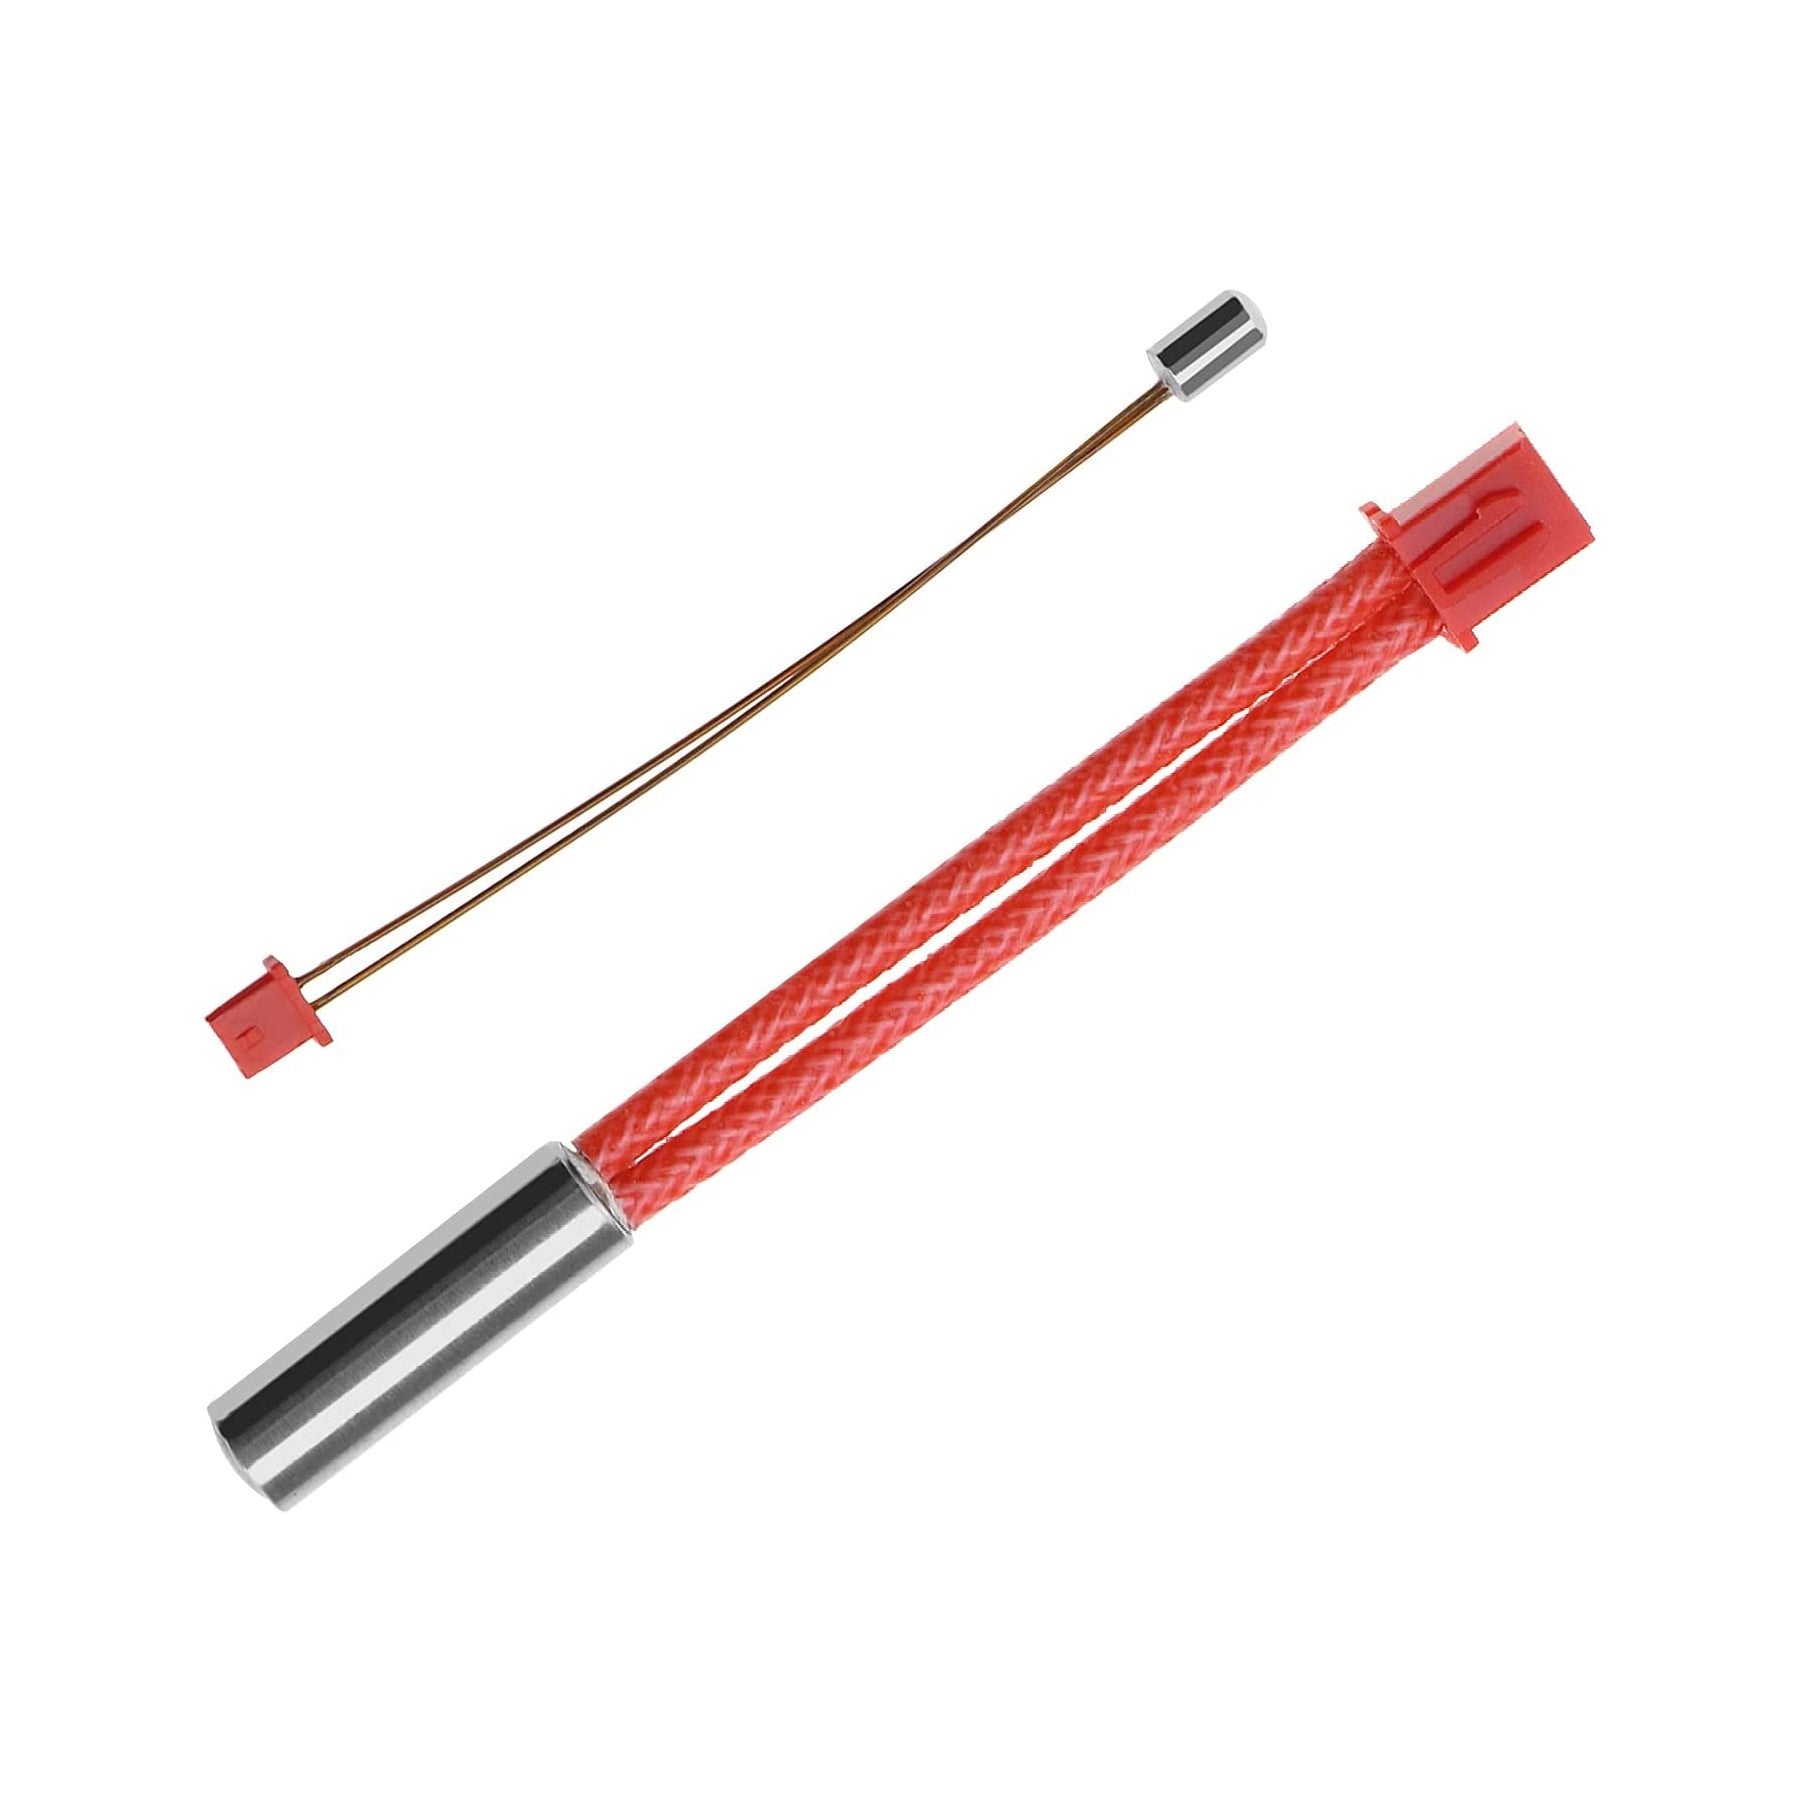 Nozzle Thermistor for Creality Ender-3 S1 Pro and CR-10 Smart Pro